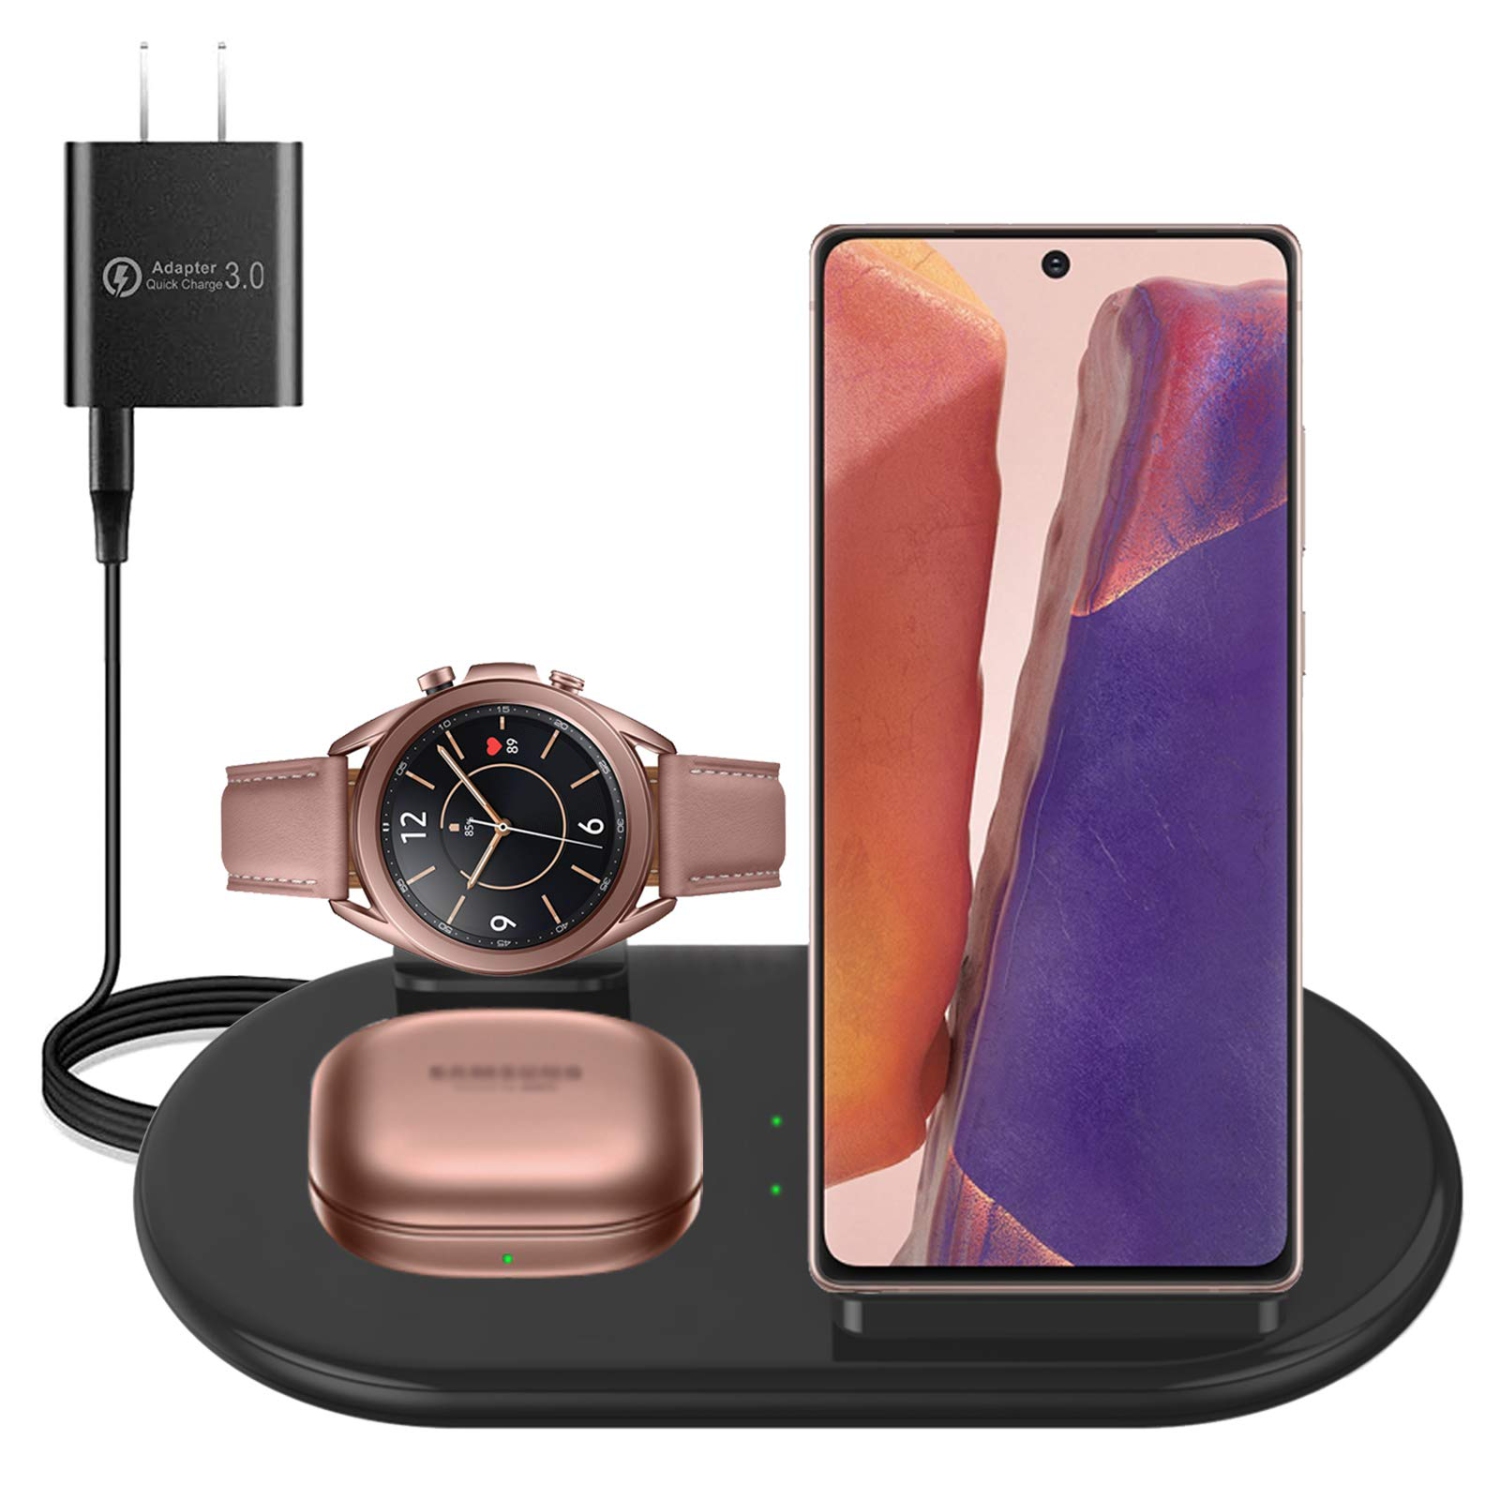 Wireless Charger 3 in 1, Wireless Charging Station for Samsung Galaxy Watch Active 2 Galaxy Watch 3 and Galaxy Buds Pro, Fas